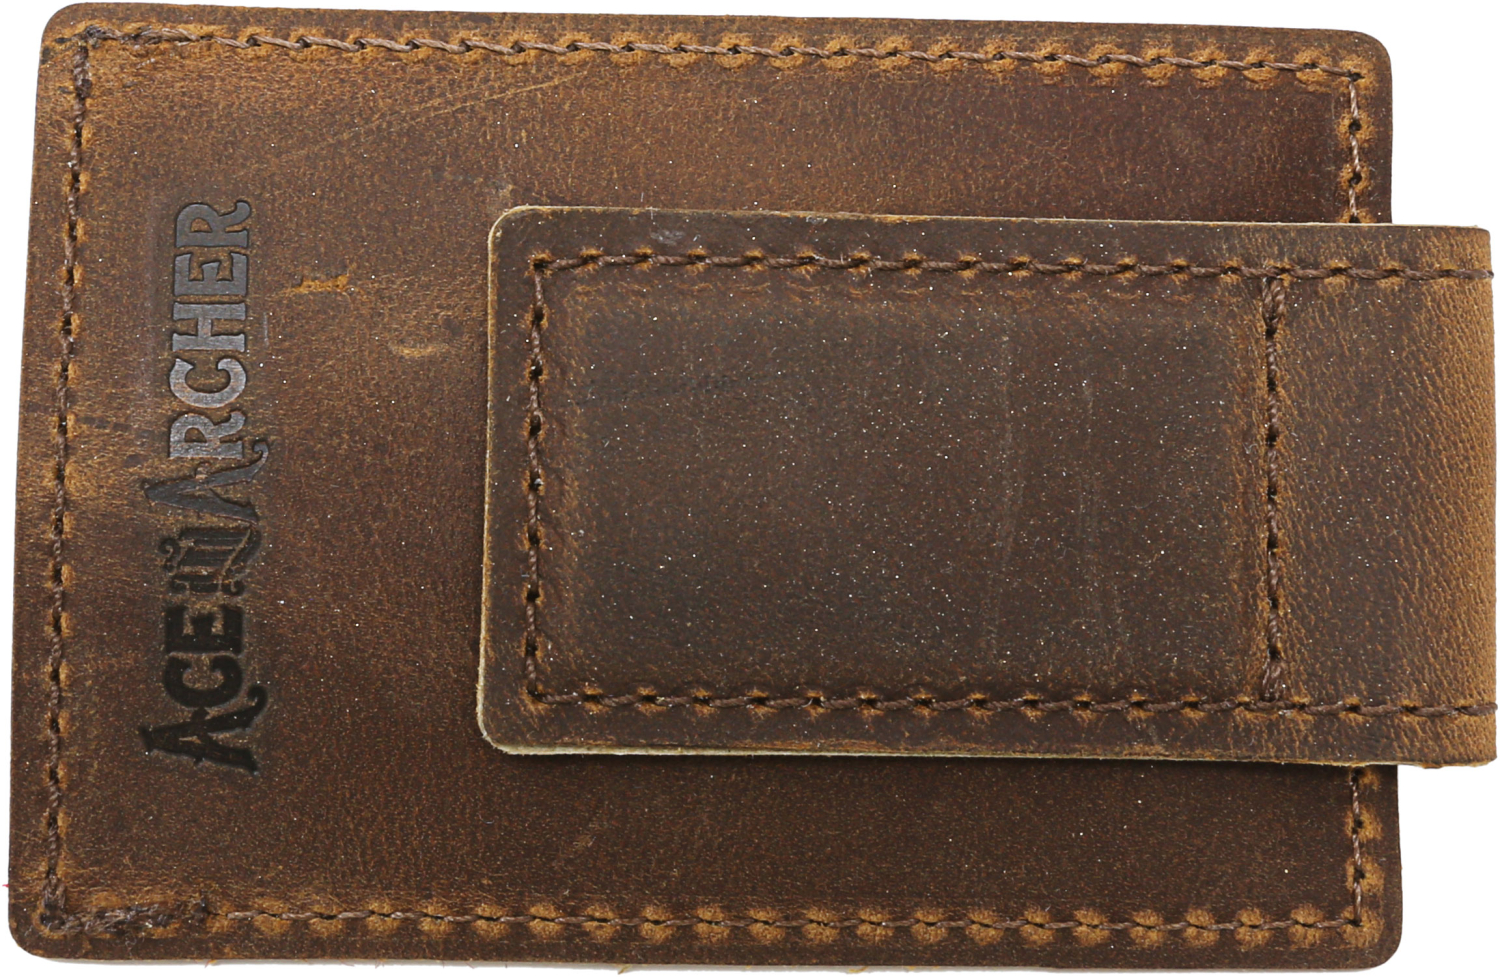 Money Clip with Card Slot, Brown Leather and Magnetic Closure - Brown